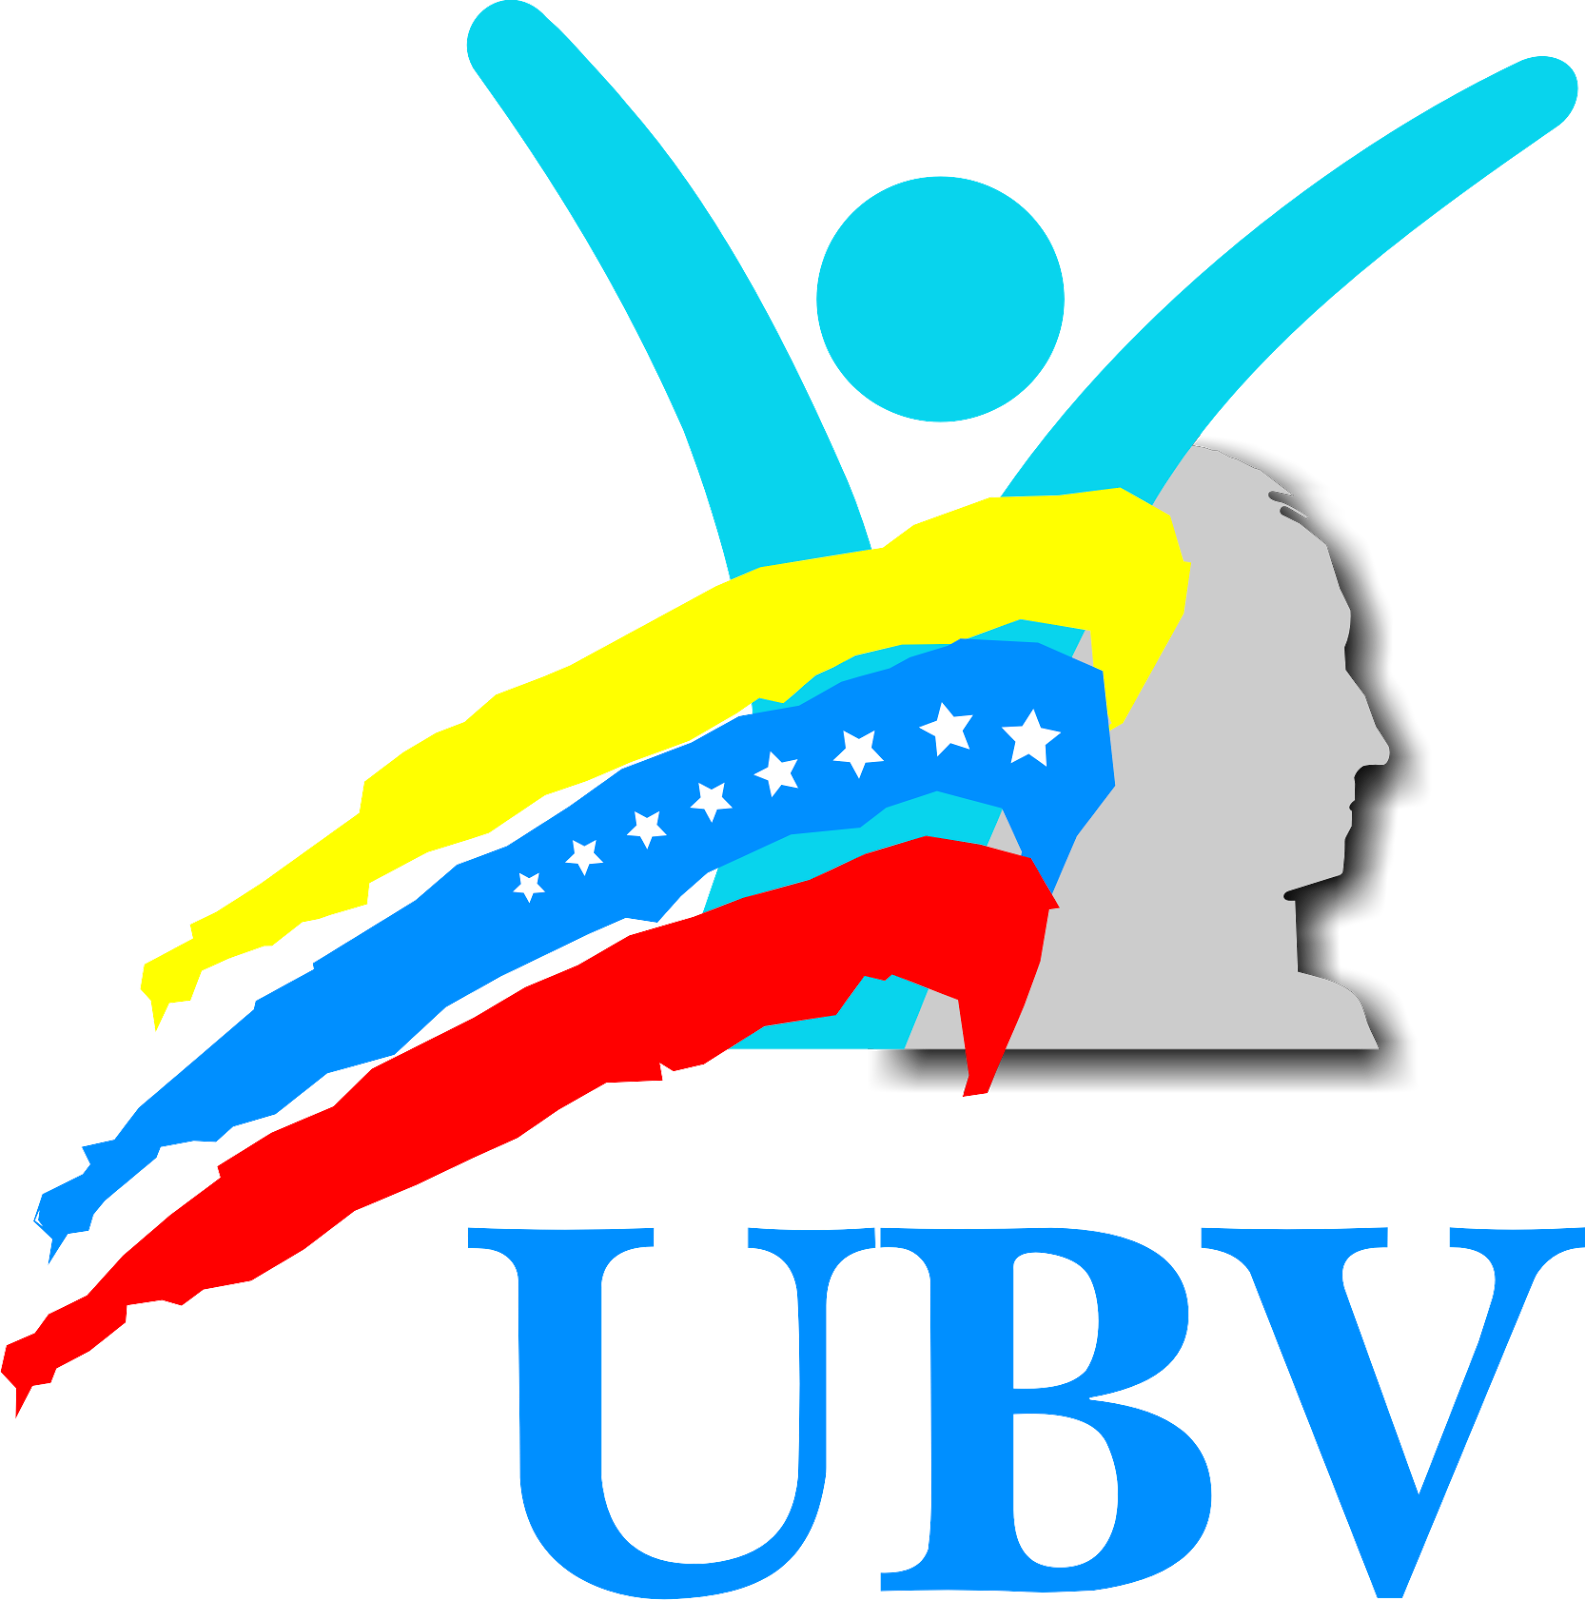 A Logo With A Person With Colorful Stripes